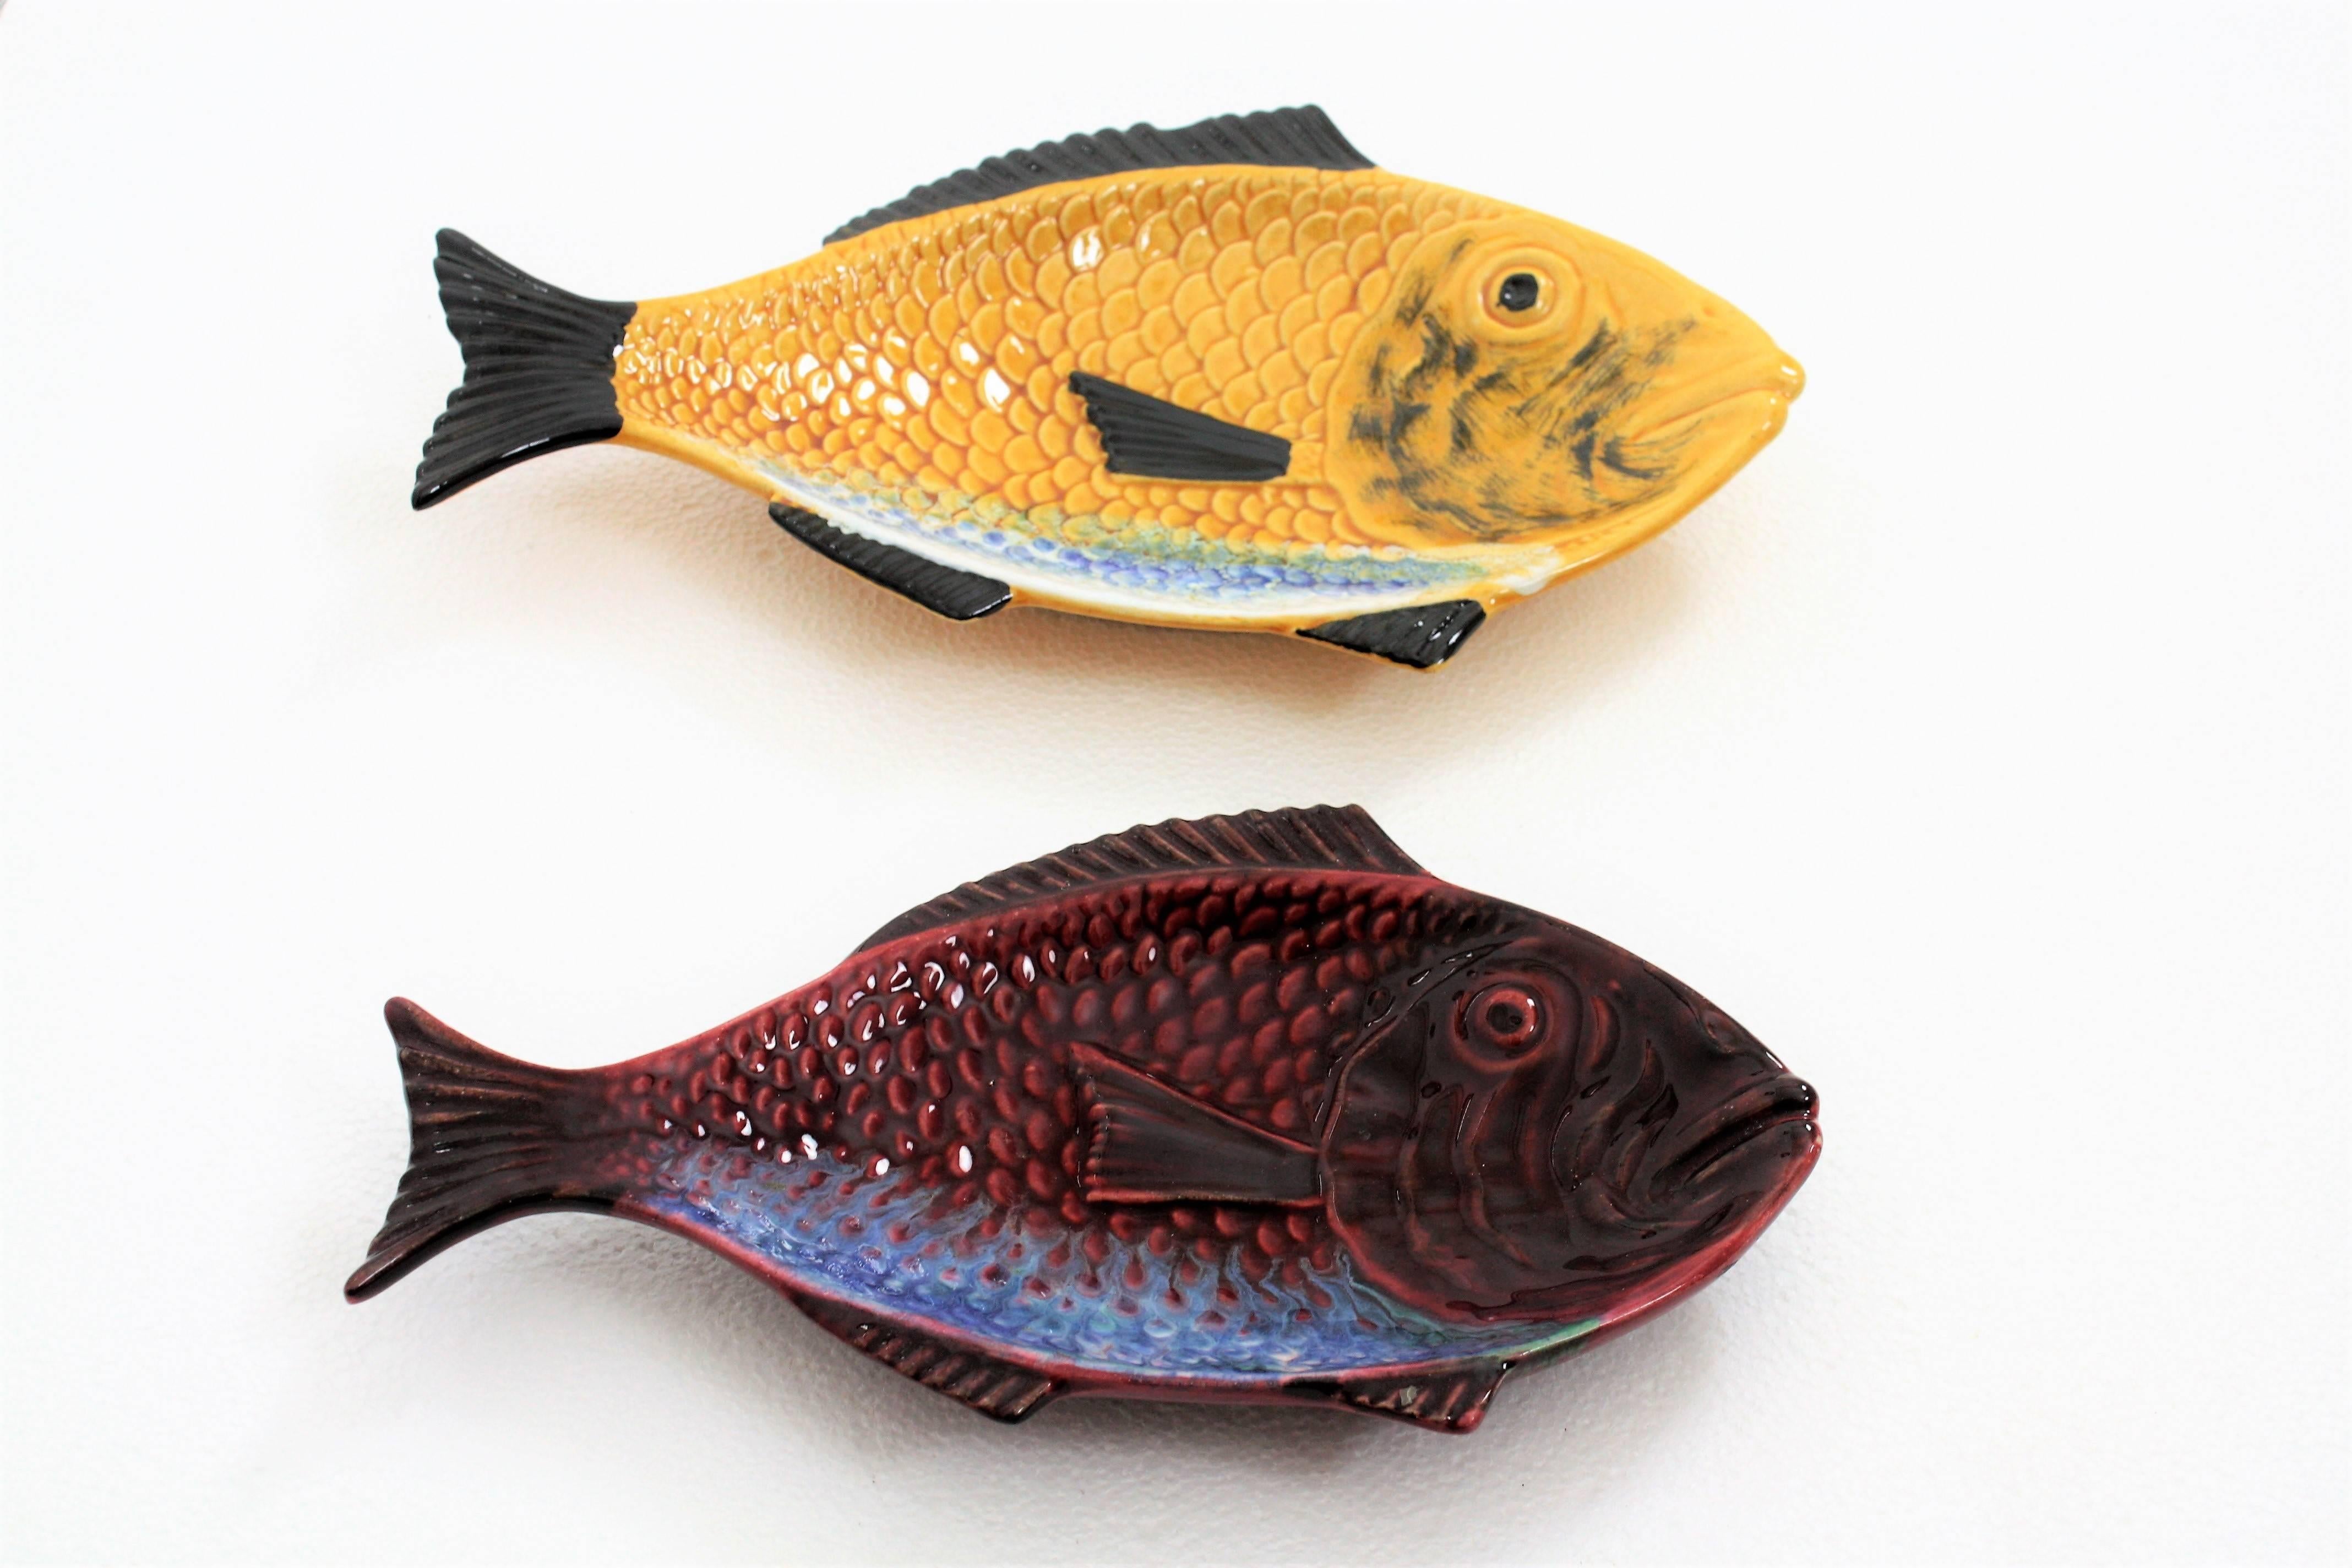 Unmatching Pair of Glazed Ceramic Fish Plates Wall Decorations or Platters
Pair of Portuguese red and yellow ceramic plates from the Mid-Century Modern period.
Use them a serving trays or place them as wall decorations alone or as a part of a bigger